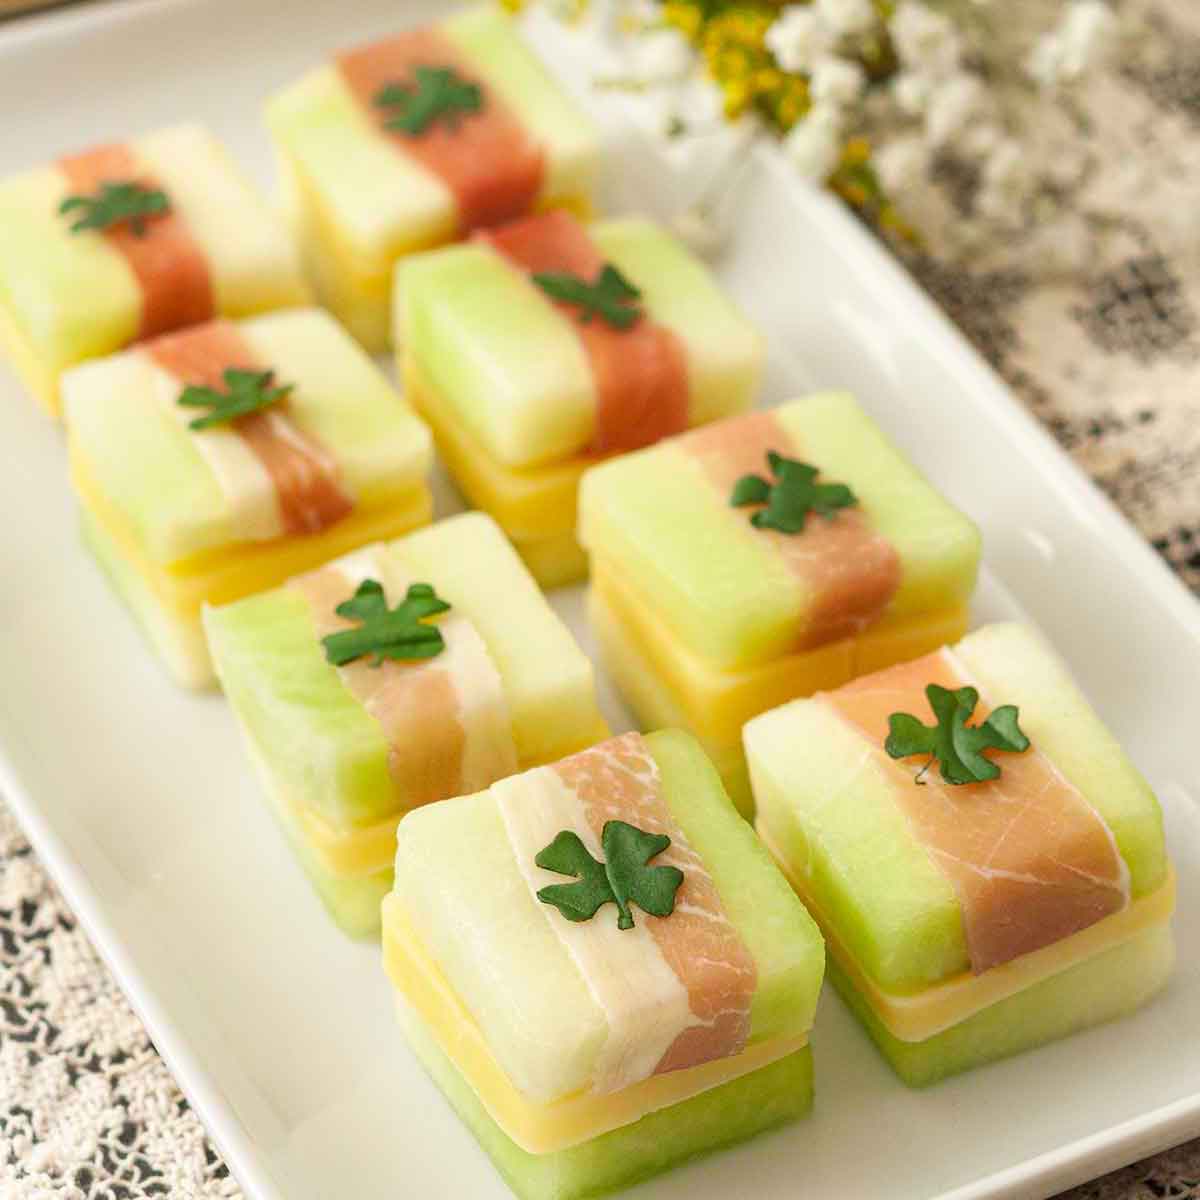 8 St. Patrick's Day melon appetizers with clovers on top, on a white plate, on a lace table cloth..